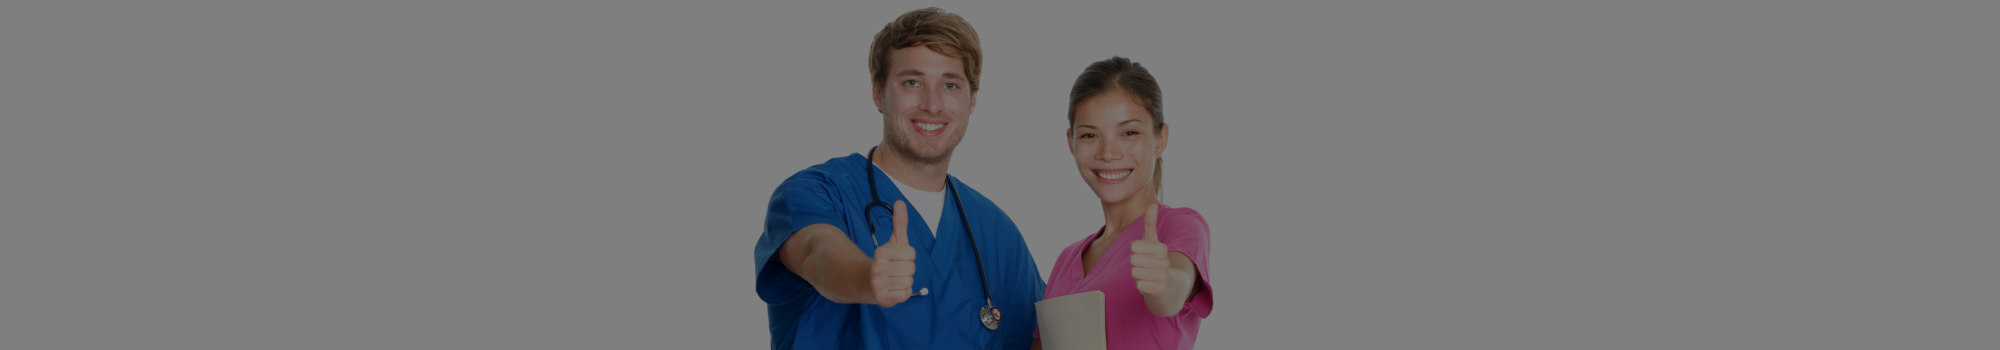 two medical staff smiling